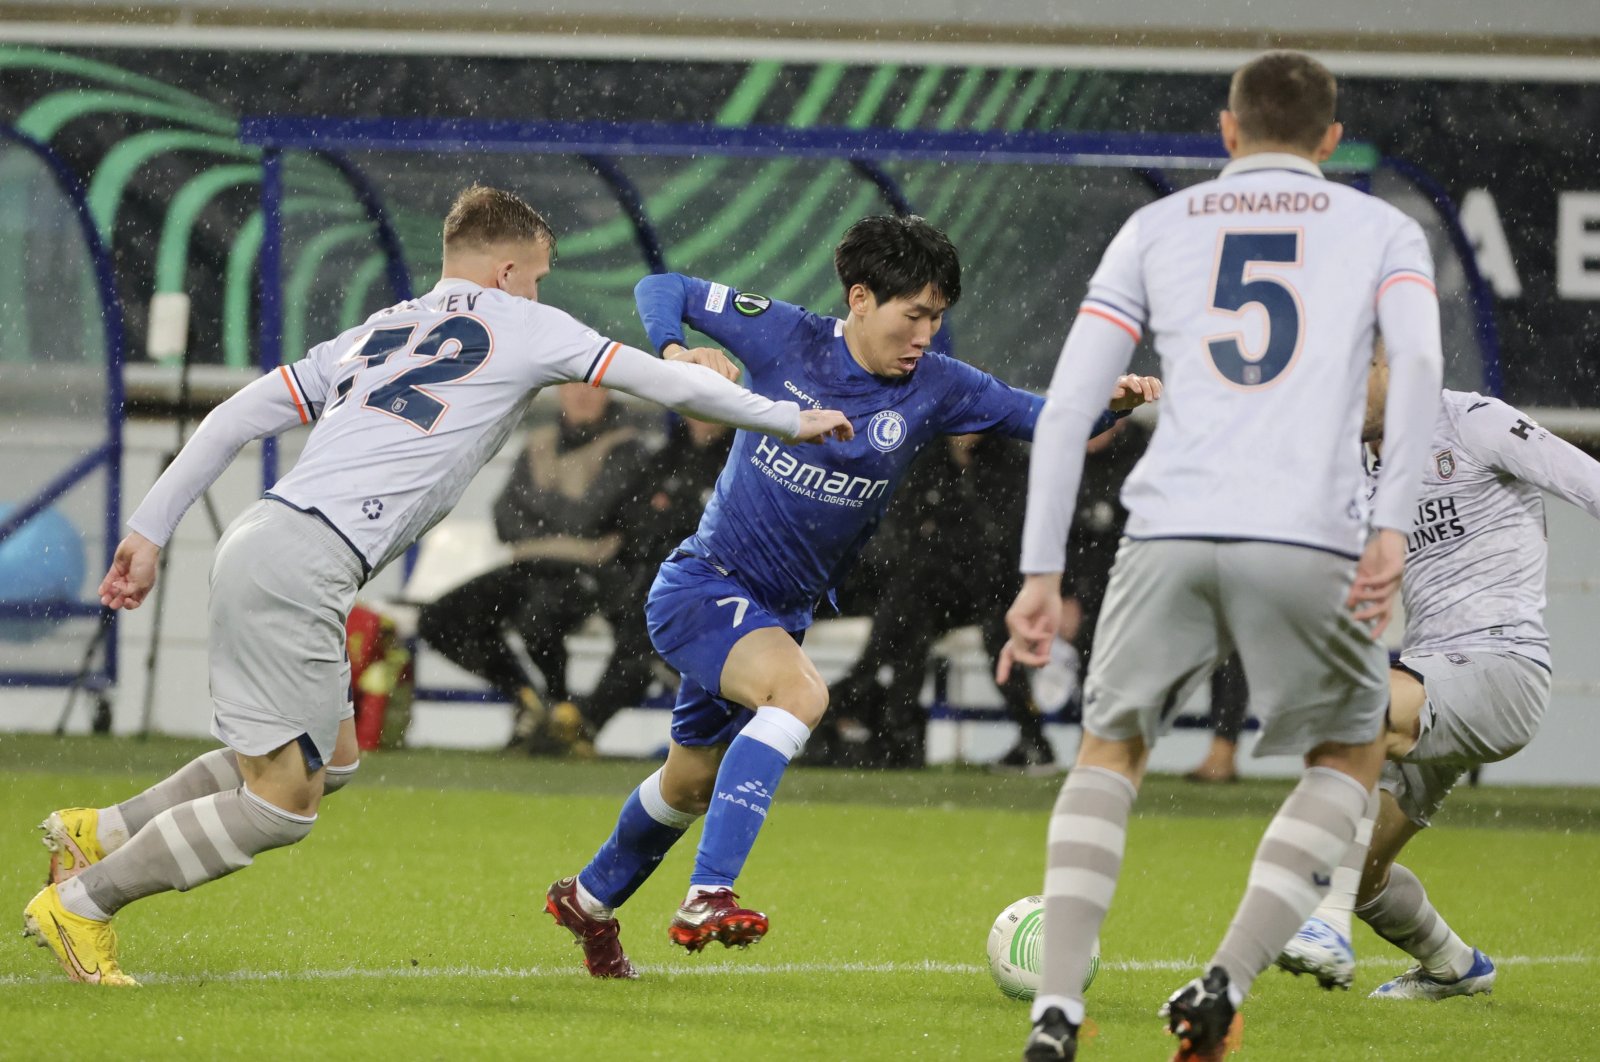 Istanbul Başakşehir&#039;s Eden Karzev (L) fights for the ball with Gent&#039;s Hyunseok Hong (C) during the Europa Conference League round of 16 first leg match at KAA Gent stadium, Ghent, Belgium, March 9, 2023. (AP Photo)